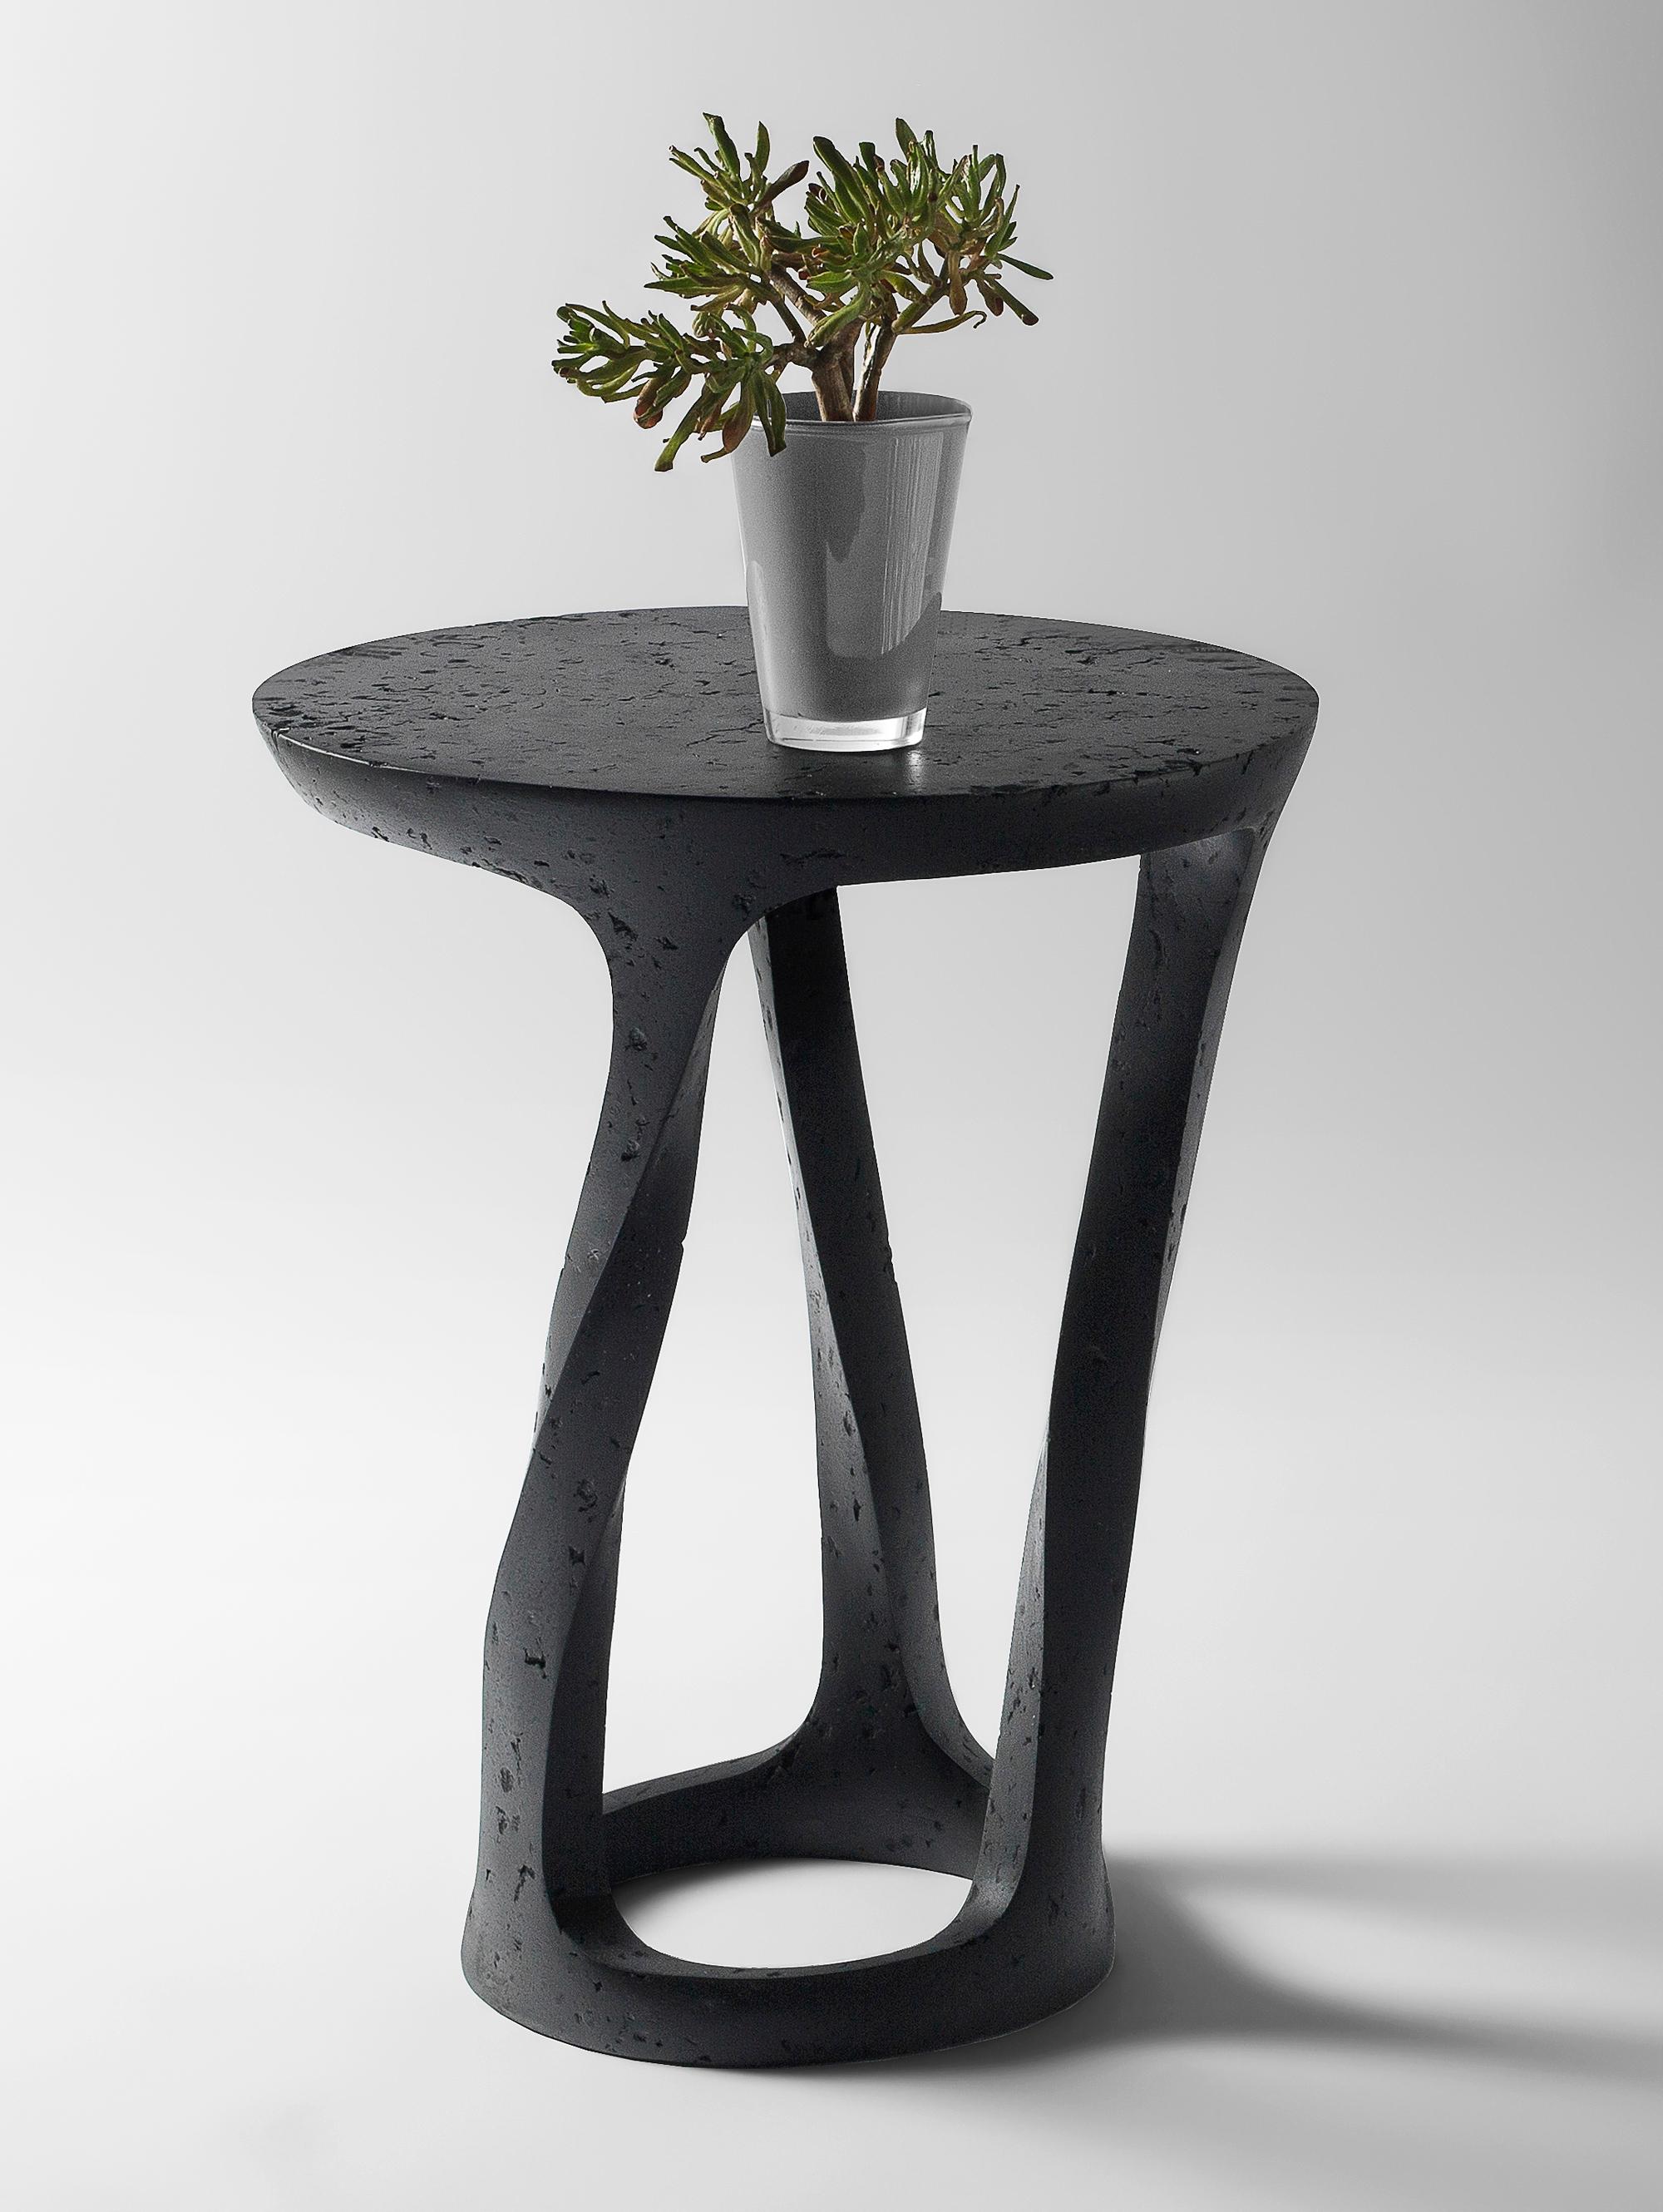 Bent Side Table by Kasanai
Dimensions: D 45 x H 62 cm.
Materials: Cement, wood, recycled paper, glue, paint.
6 kg.

The fusion of sturdiness and elegance, along with the blend of archaism and modernity. More than just a surface for placing objects,